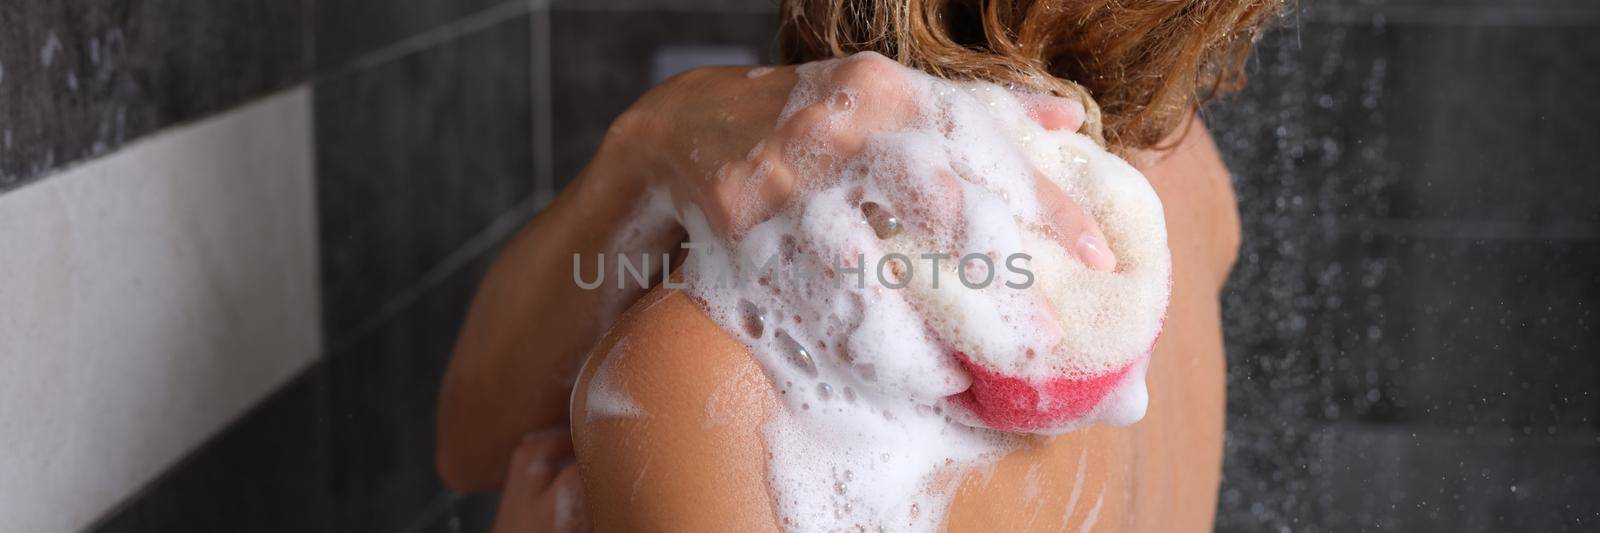 A woman in the shower with a soapy sponge washes her body, view from the back. Shower gel foam on a washcloth, personal hygiene